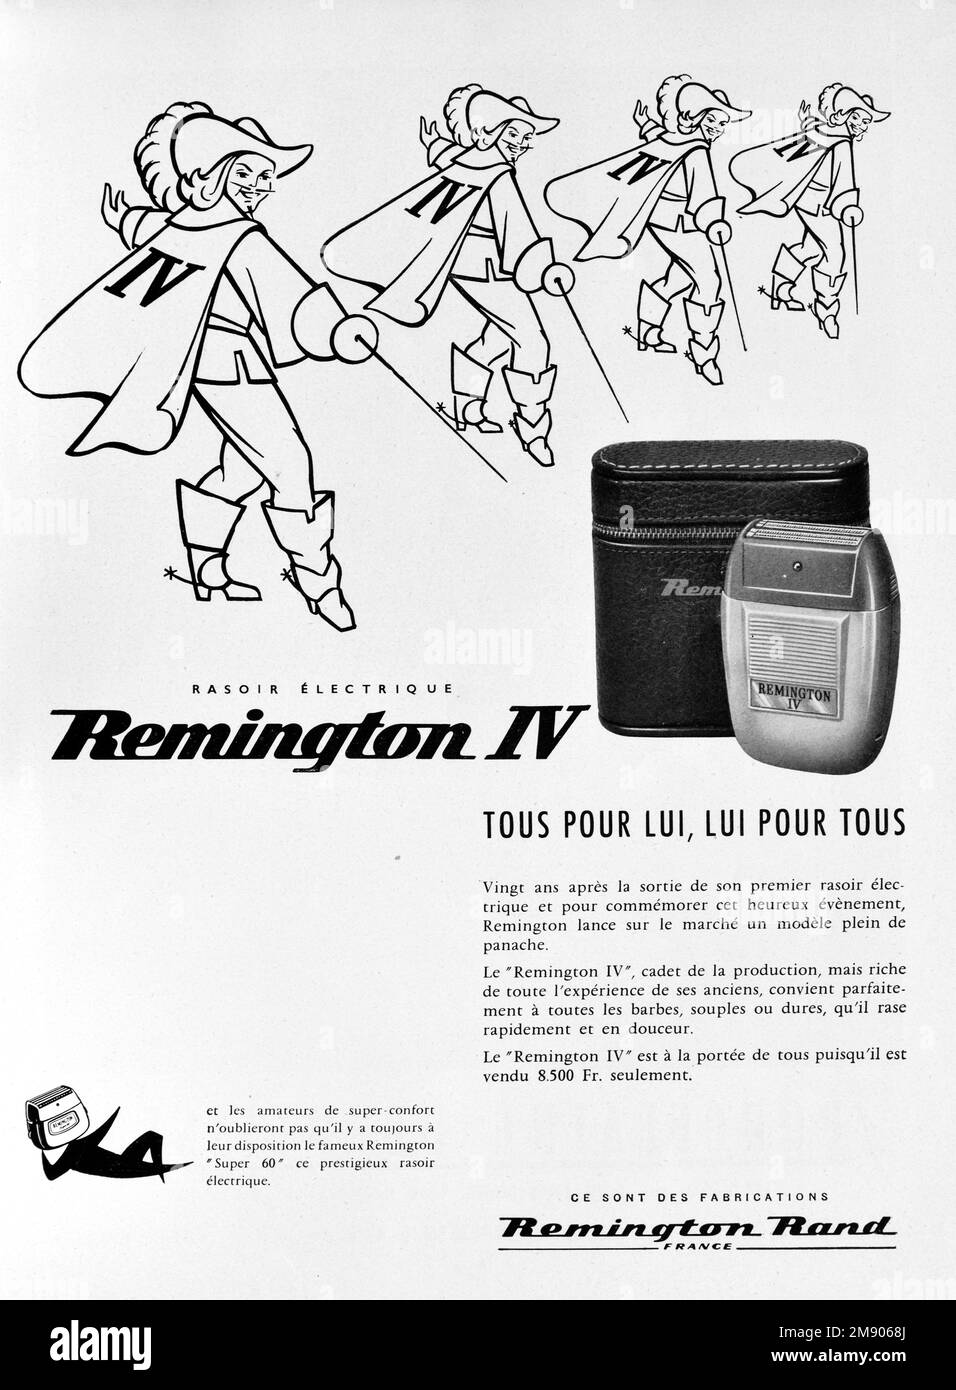 Vintage or Old Advert, Advertisement, Publicity or Illustration for Remington IV Electric Shaver or Razor 1957 illustrated with the Four Musketeers. Stock Photo